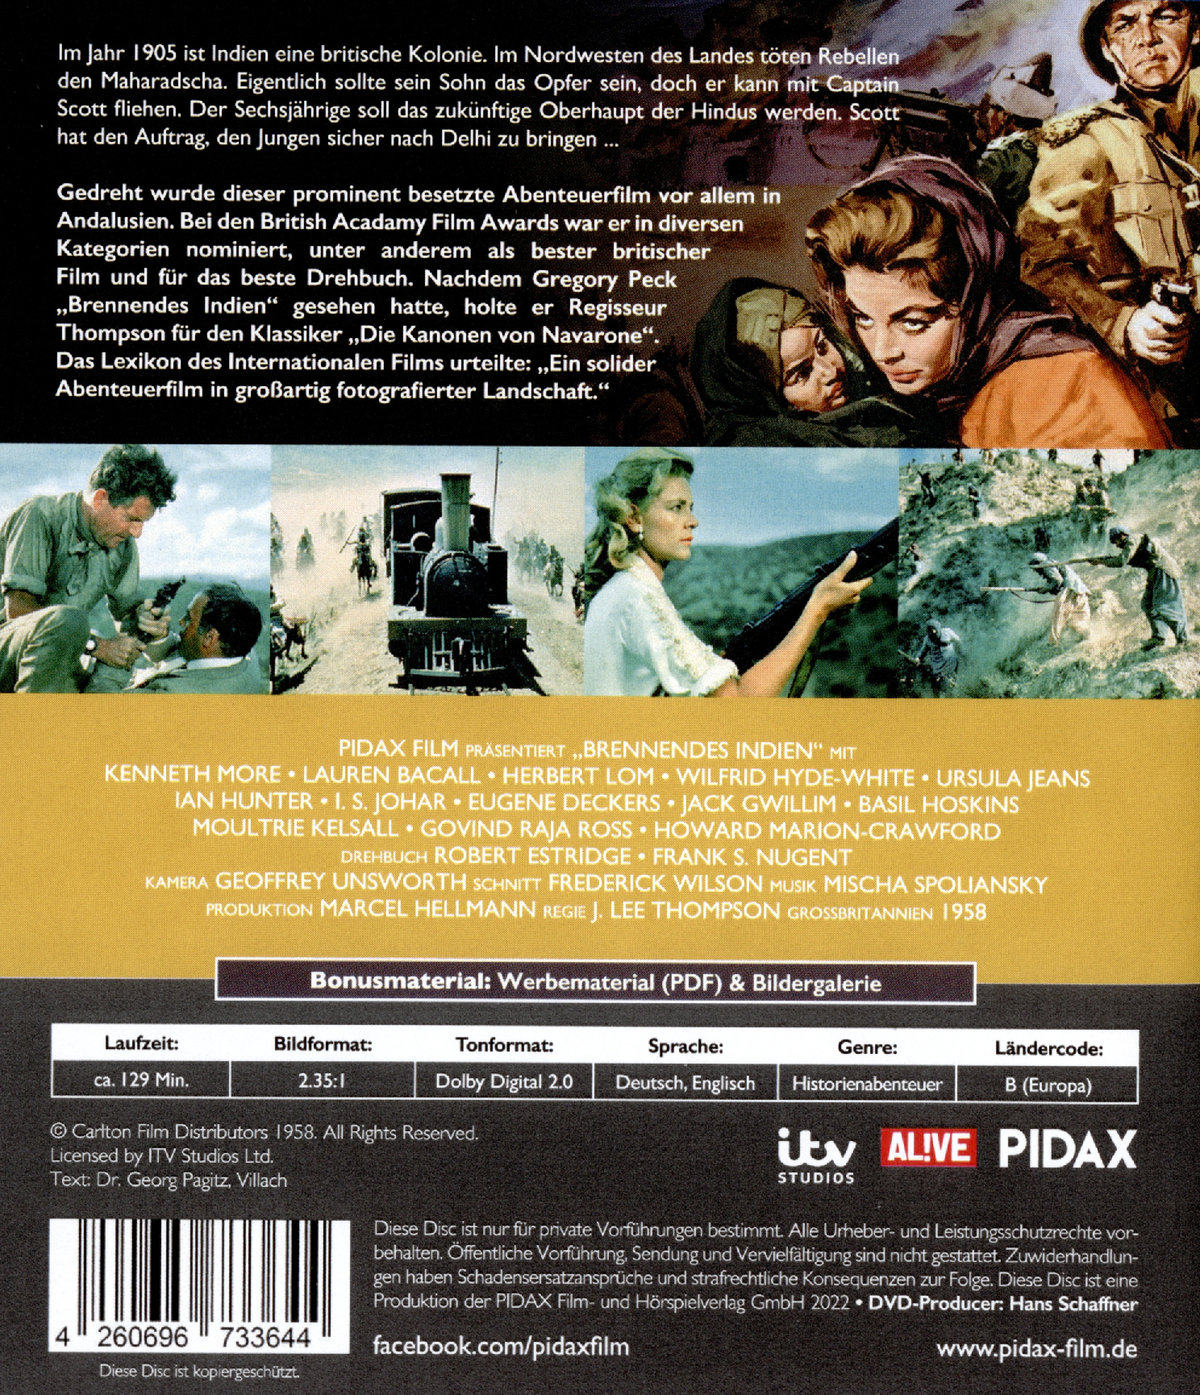 Brennendes Indien (blu-ray)